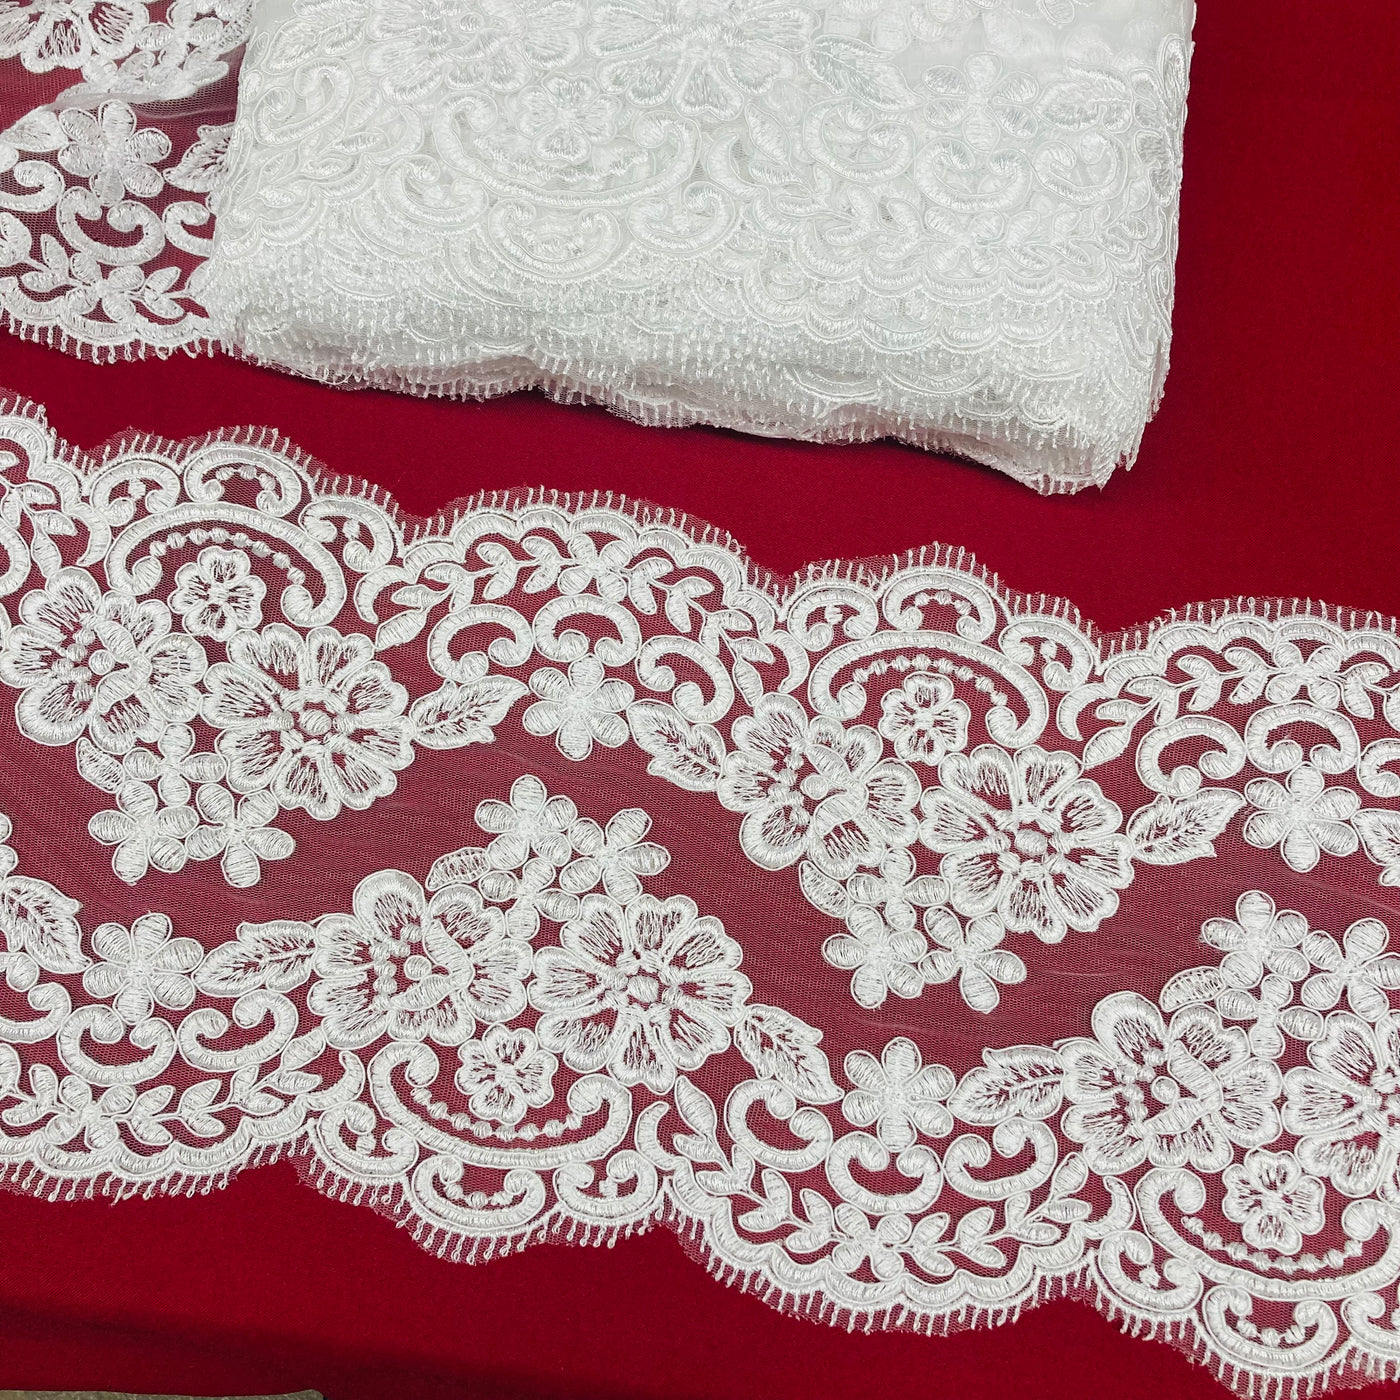 Corded & Embroidered Double Sided Trimming on Mesh Net Lace. Lace USA